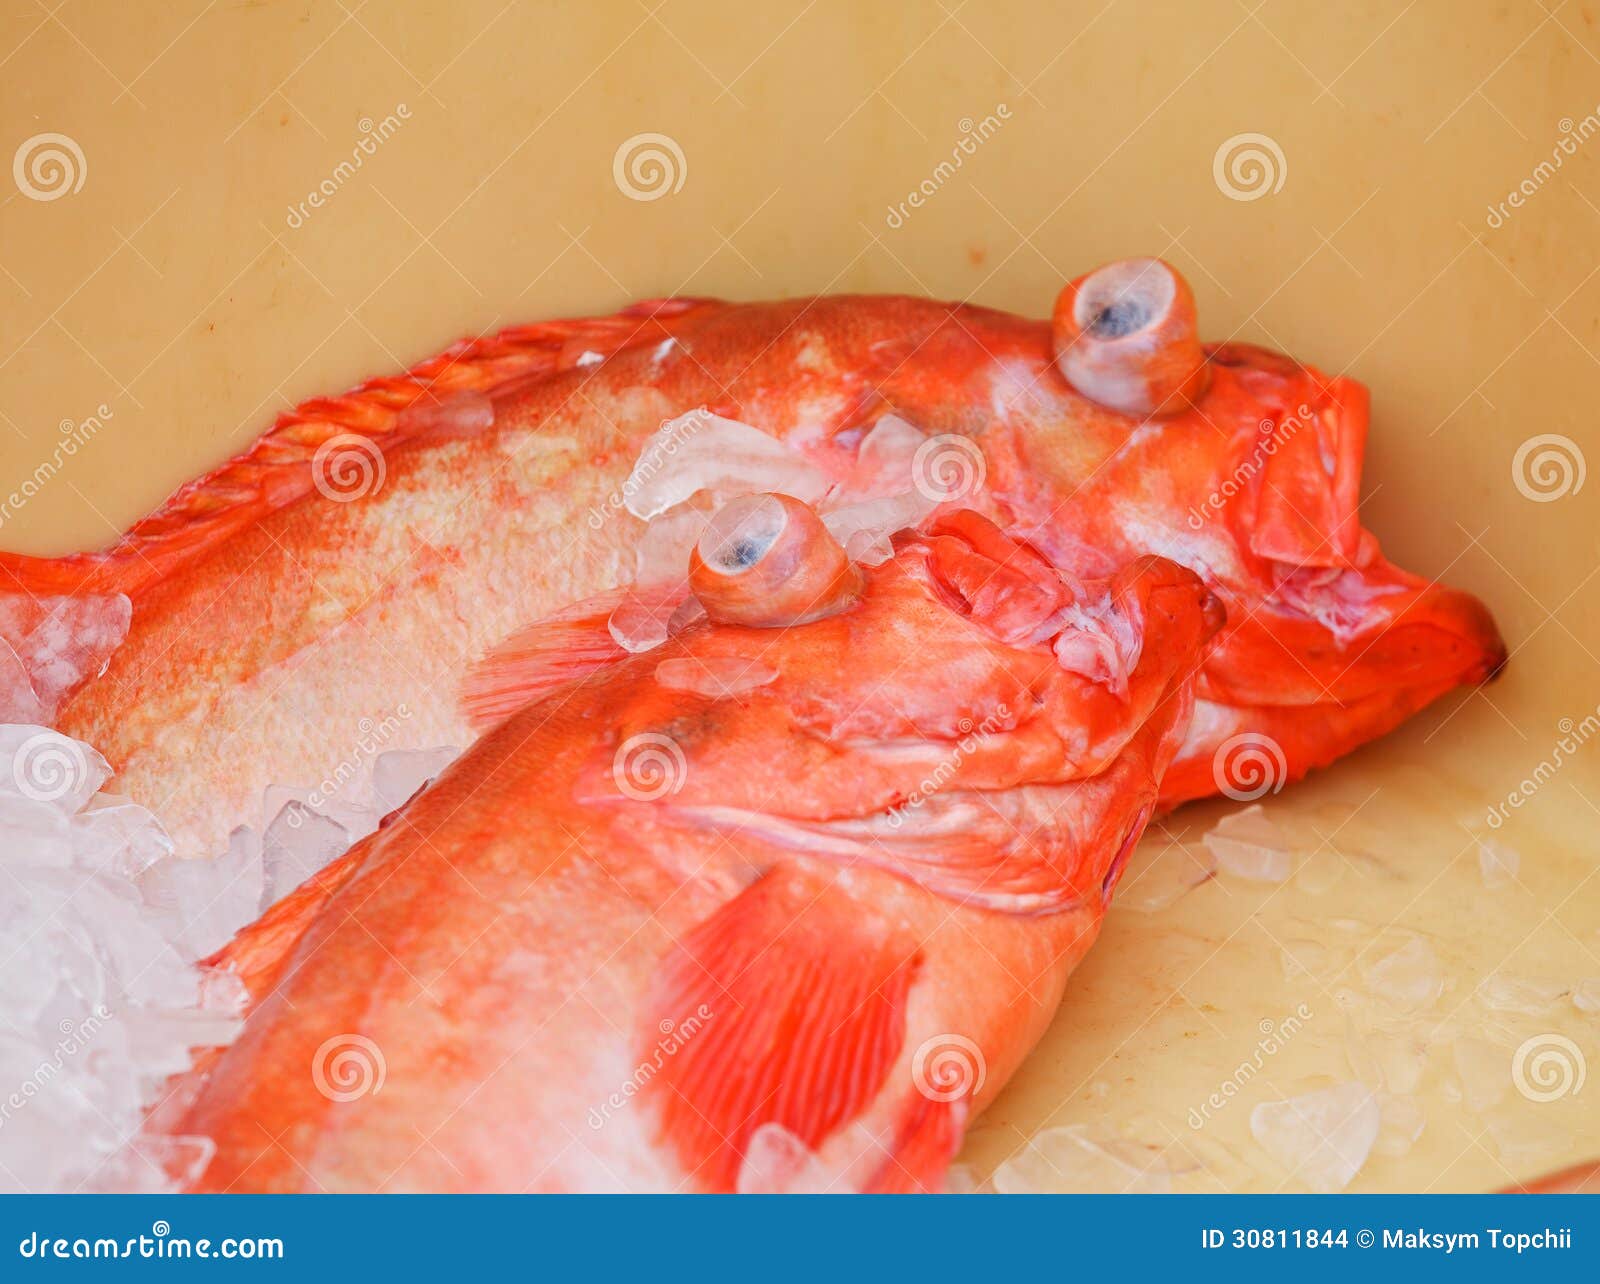 Fish in containers stock photo. Image of catch, cold - 30811844